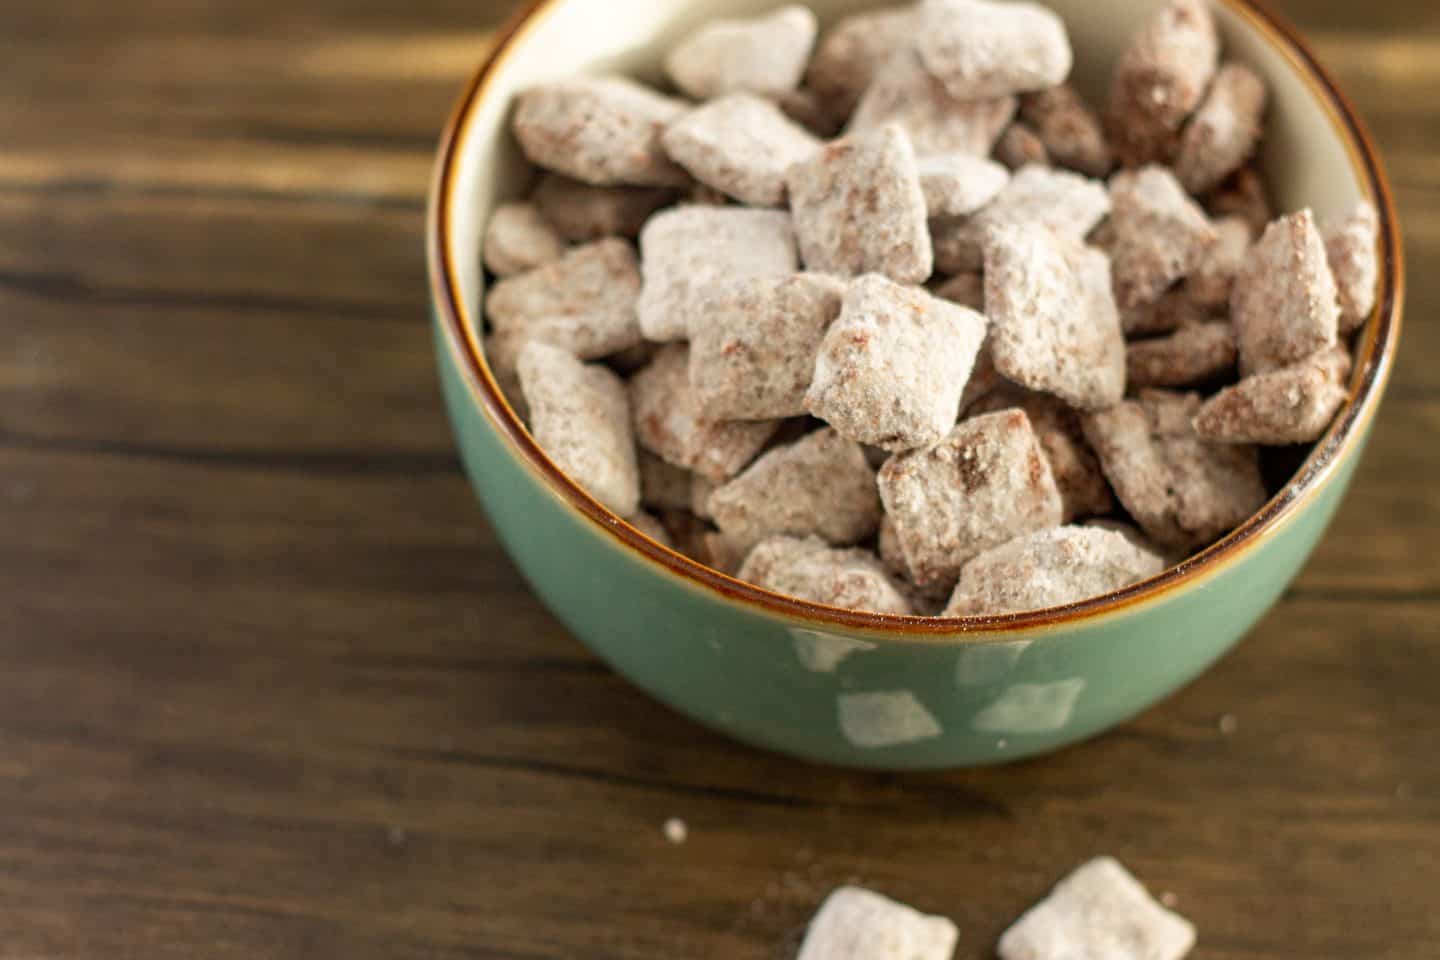 A bowl of puppy chow